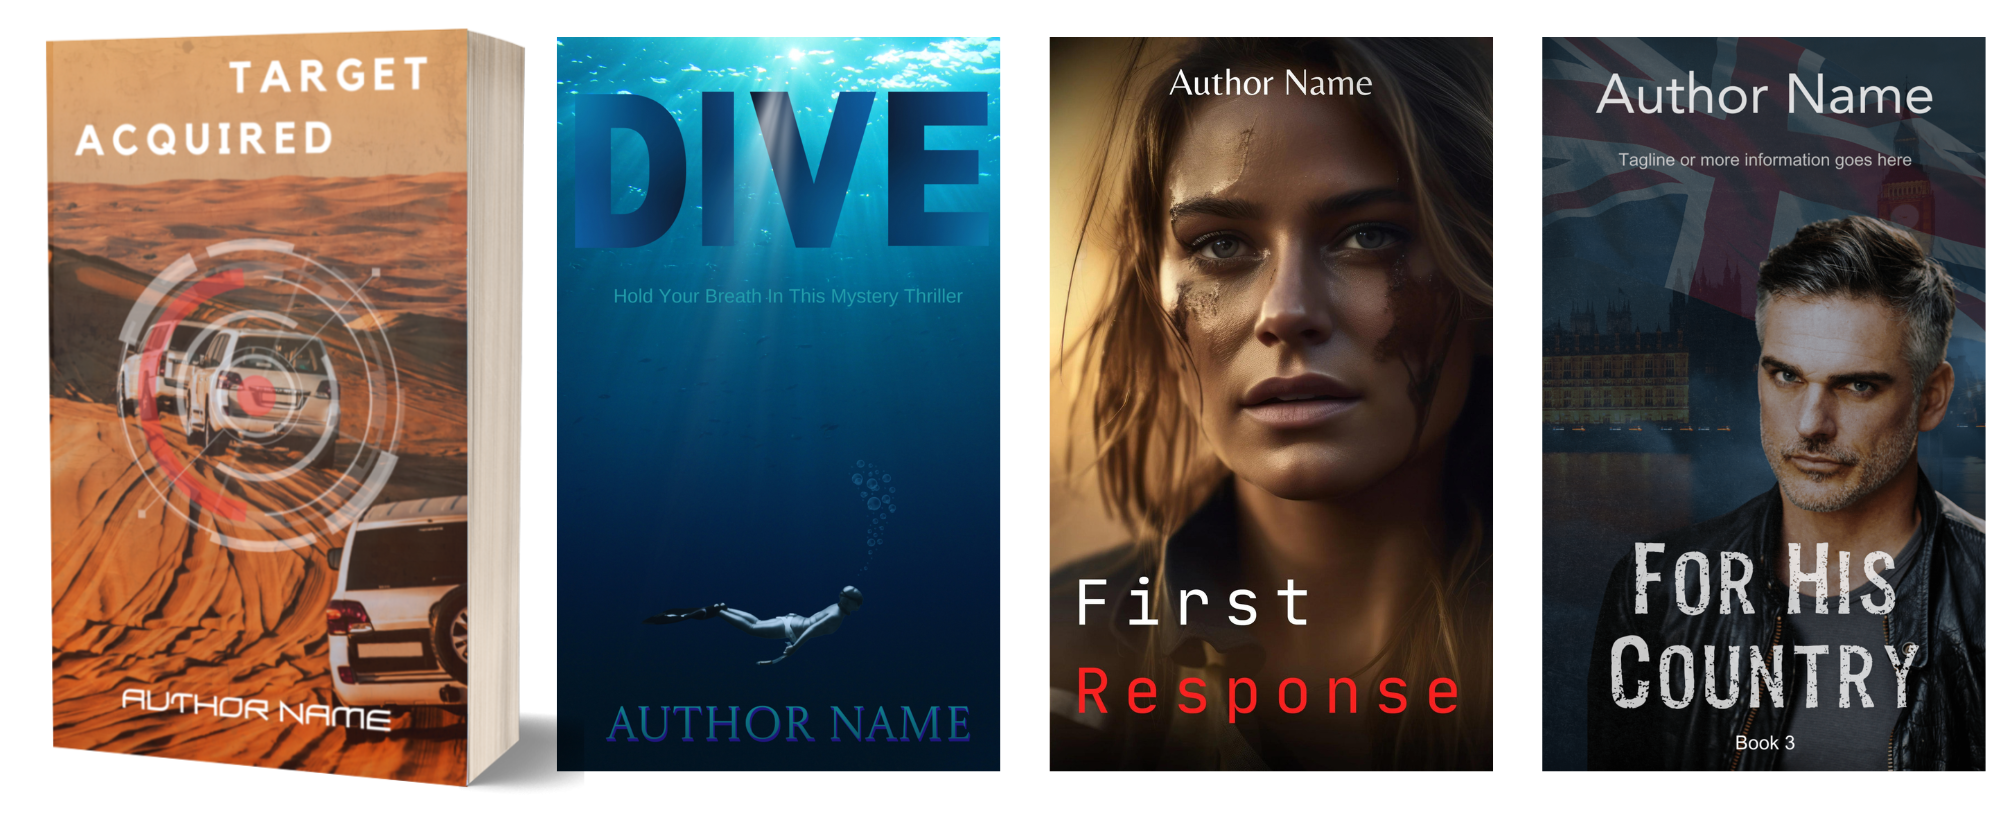 A collection of four book covers displayed side by side. The first cover shows a car driving on a sandy terrain. The second cover features a diver underwater. The third cover showcases a close-up of a serious-looking woman. The fourth cover portrays a serious man with a cityscape and flag in the background. BookSelf Book Cover Design & Premade Book Covers